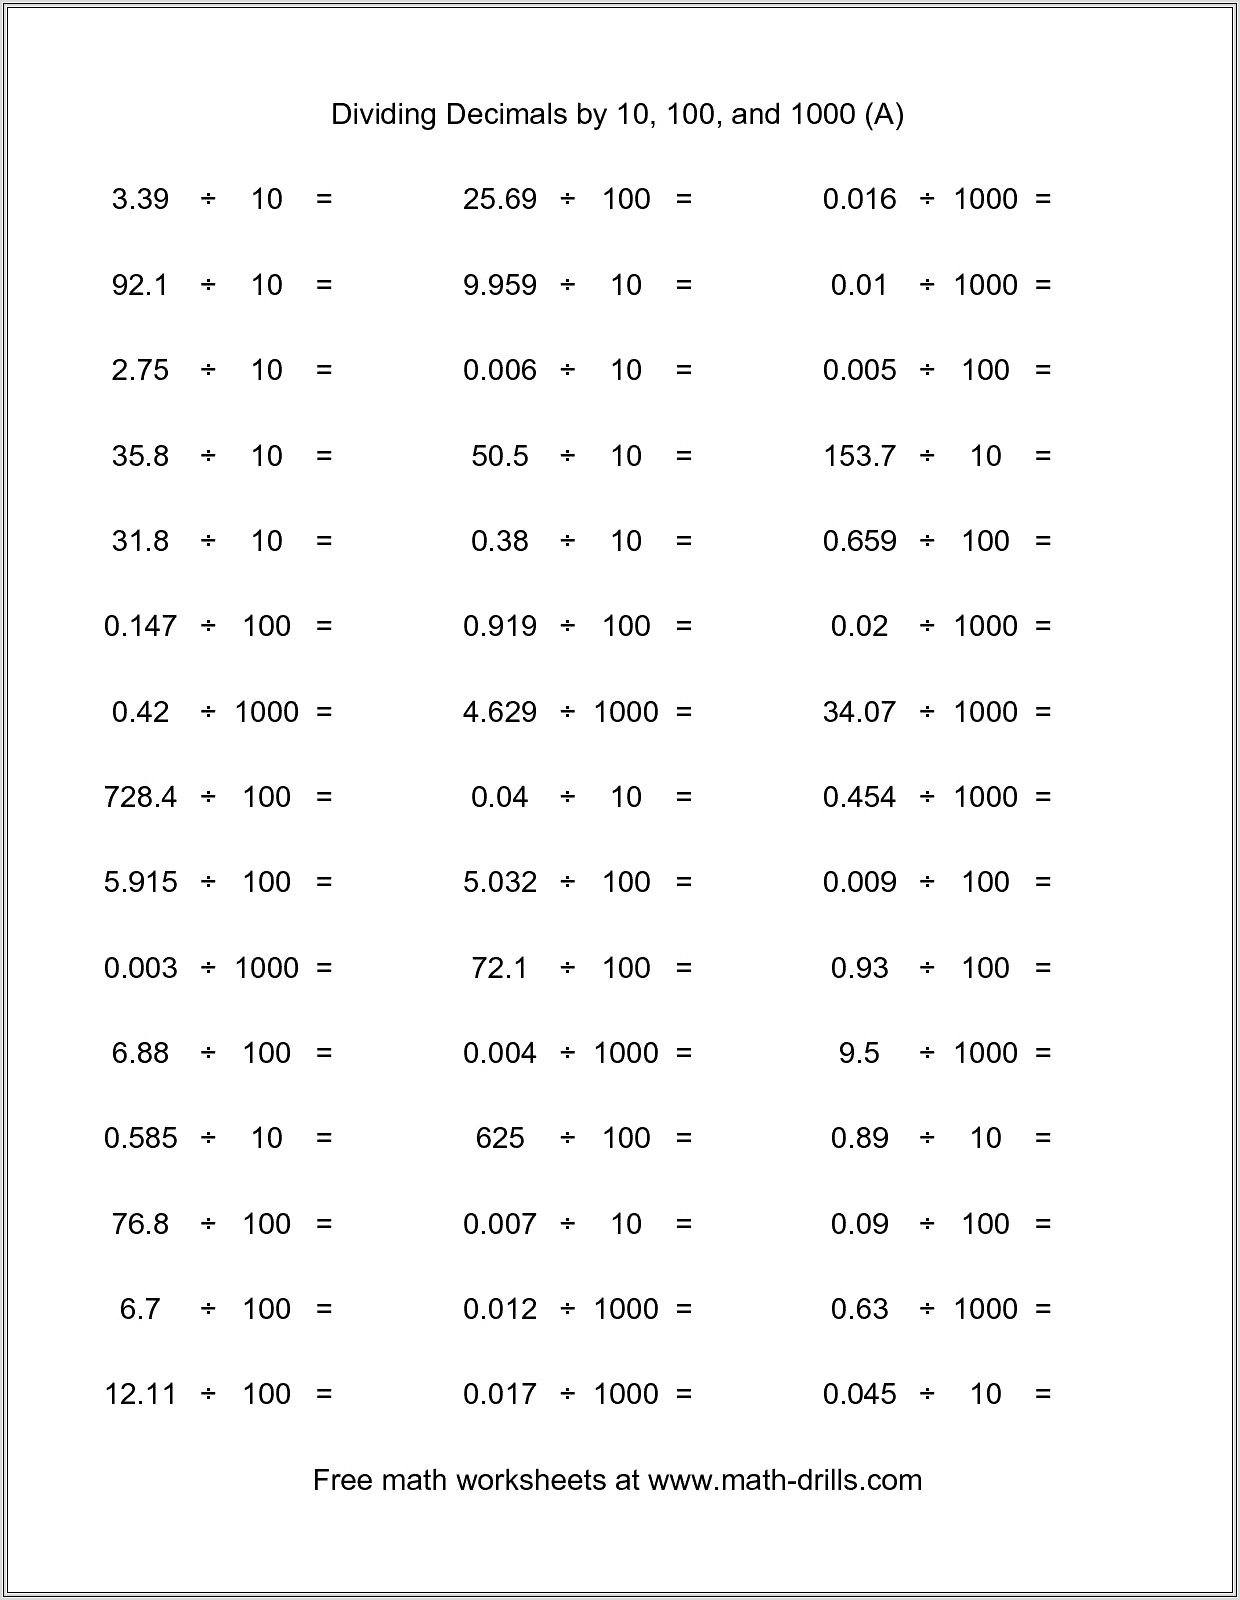 Comparing Whole Numbers Decimals Worksheet